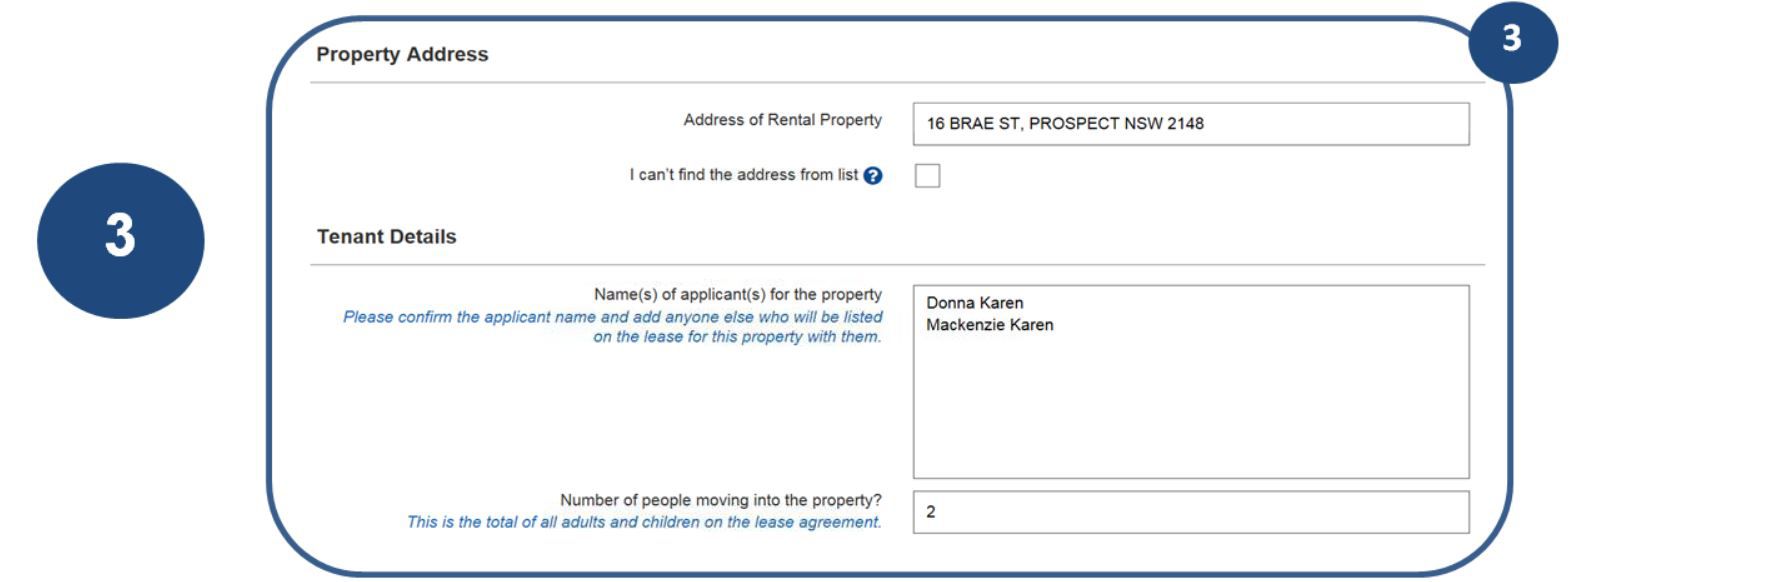 3. Confirm the details for the Rental address and Tenant